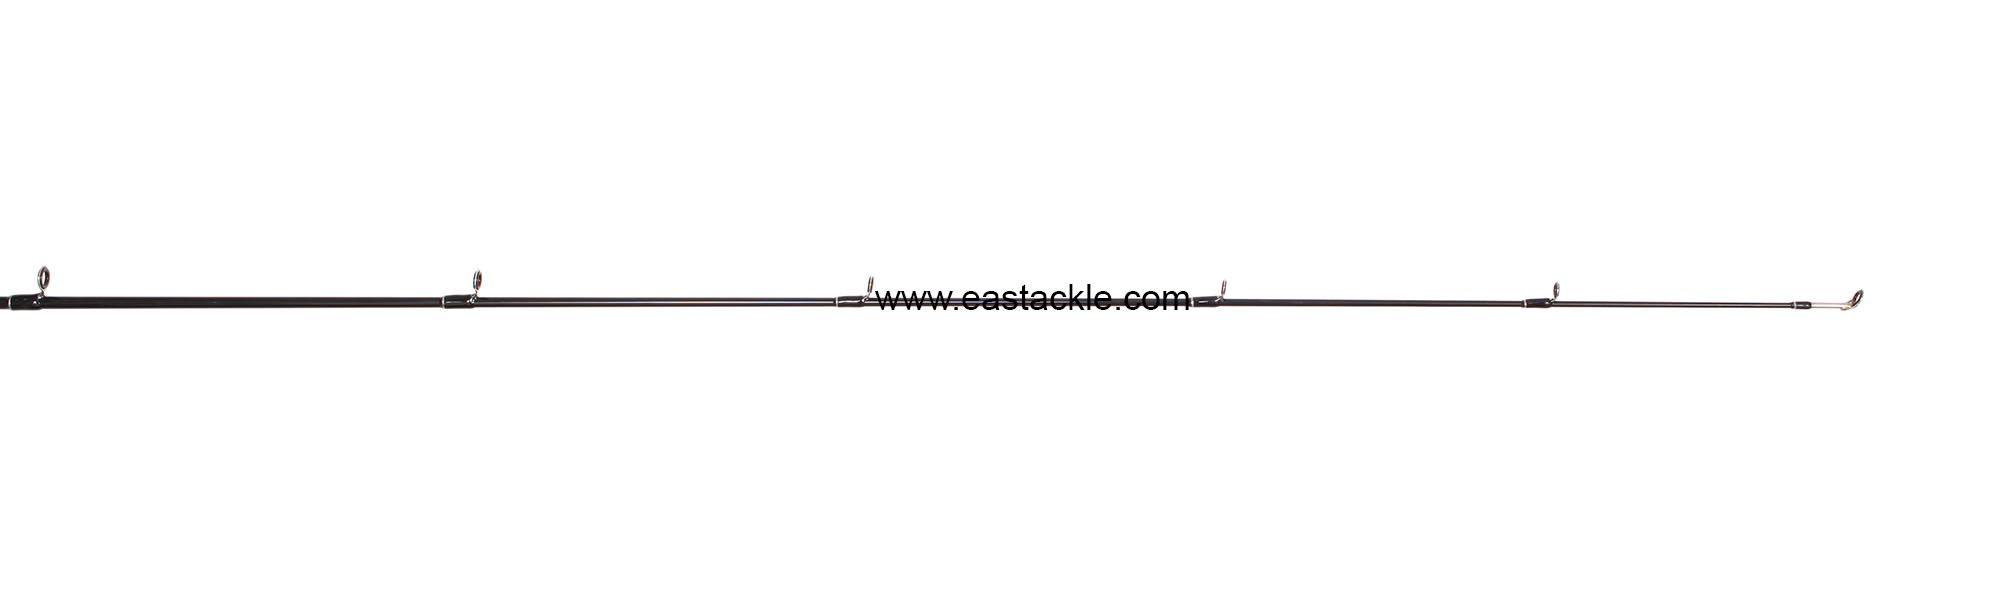 Rapala - Vellamo - VMC632M - Bait Casting Rod - Tip Section (Side View) | Eastackle